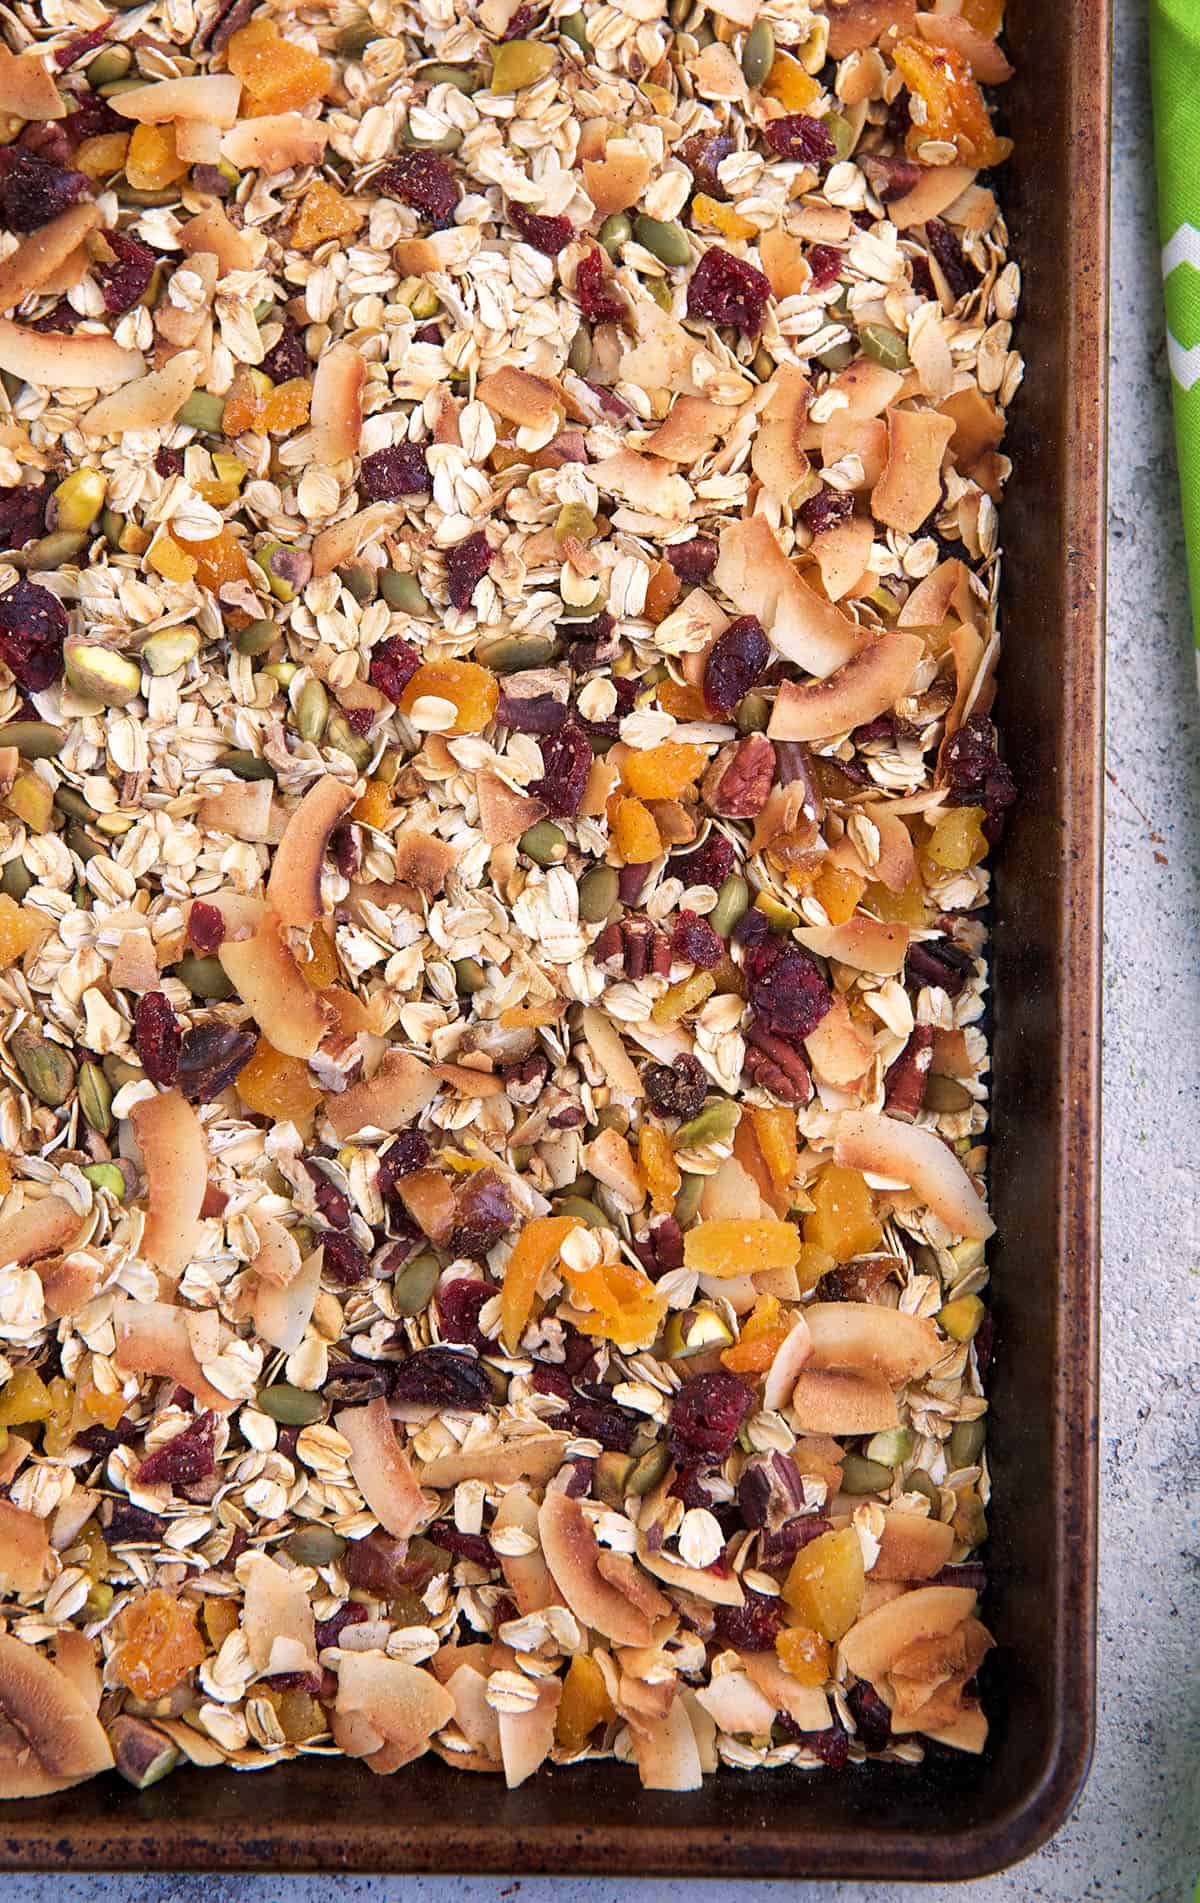 Muesli is spread out on a baking sheet.